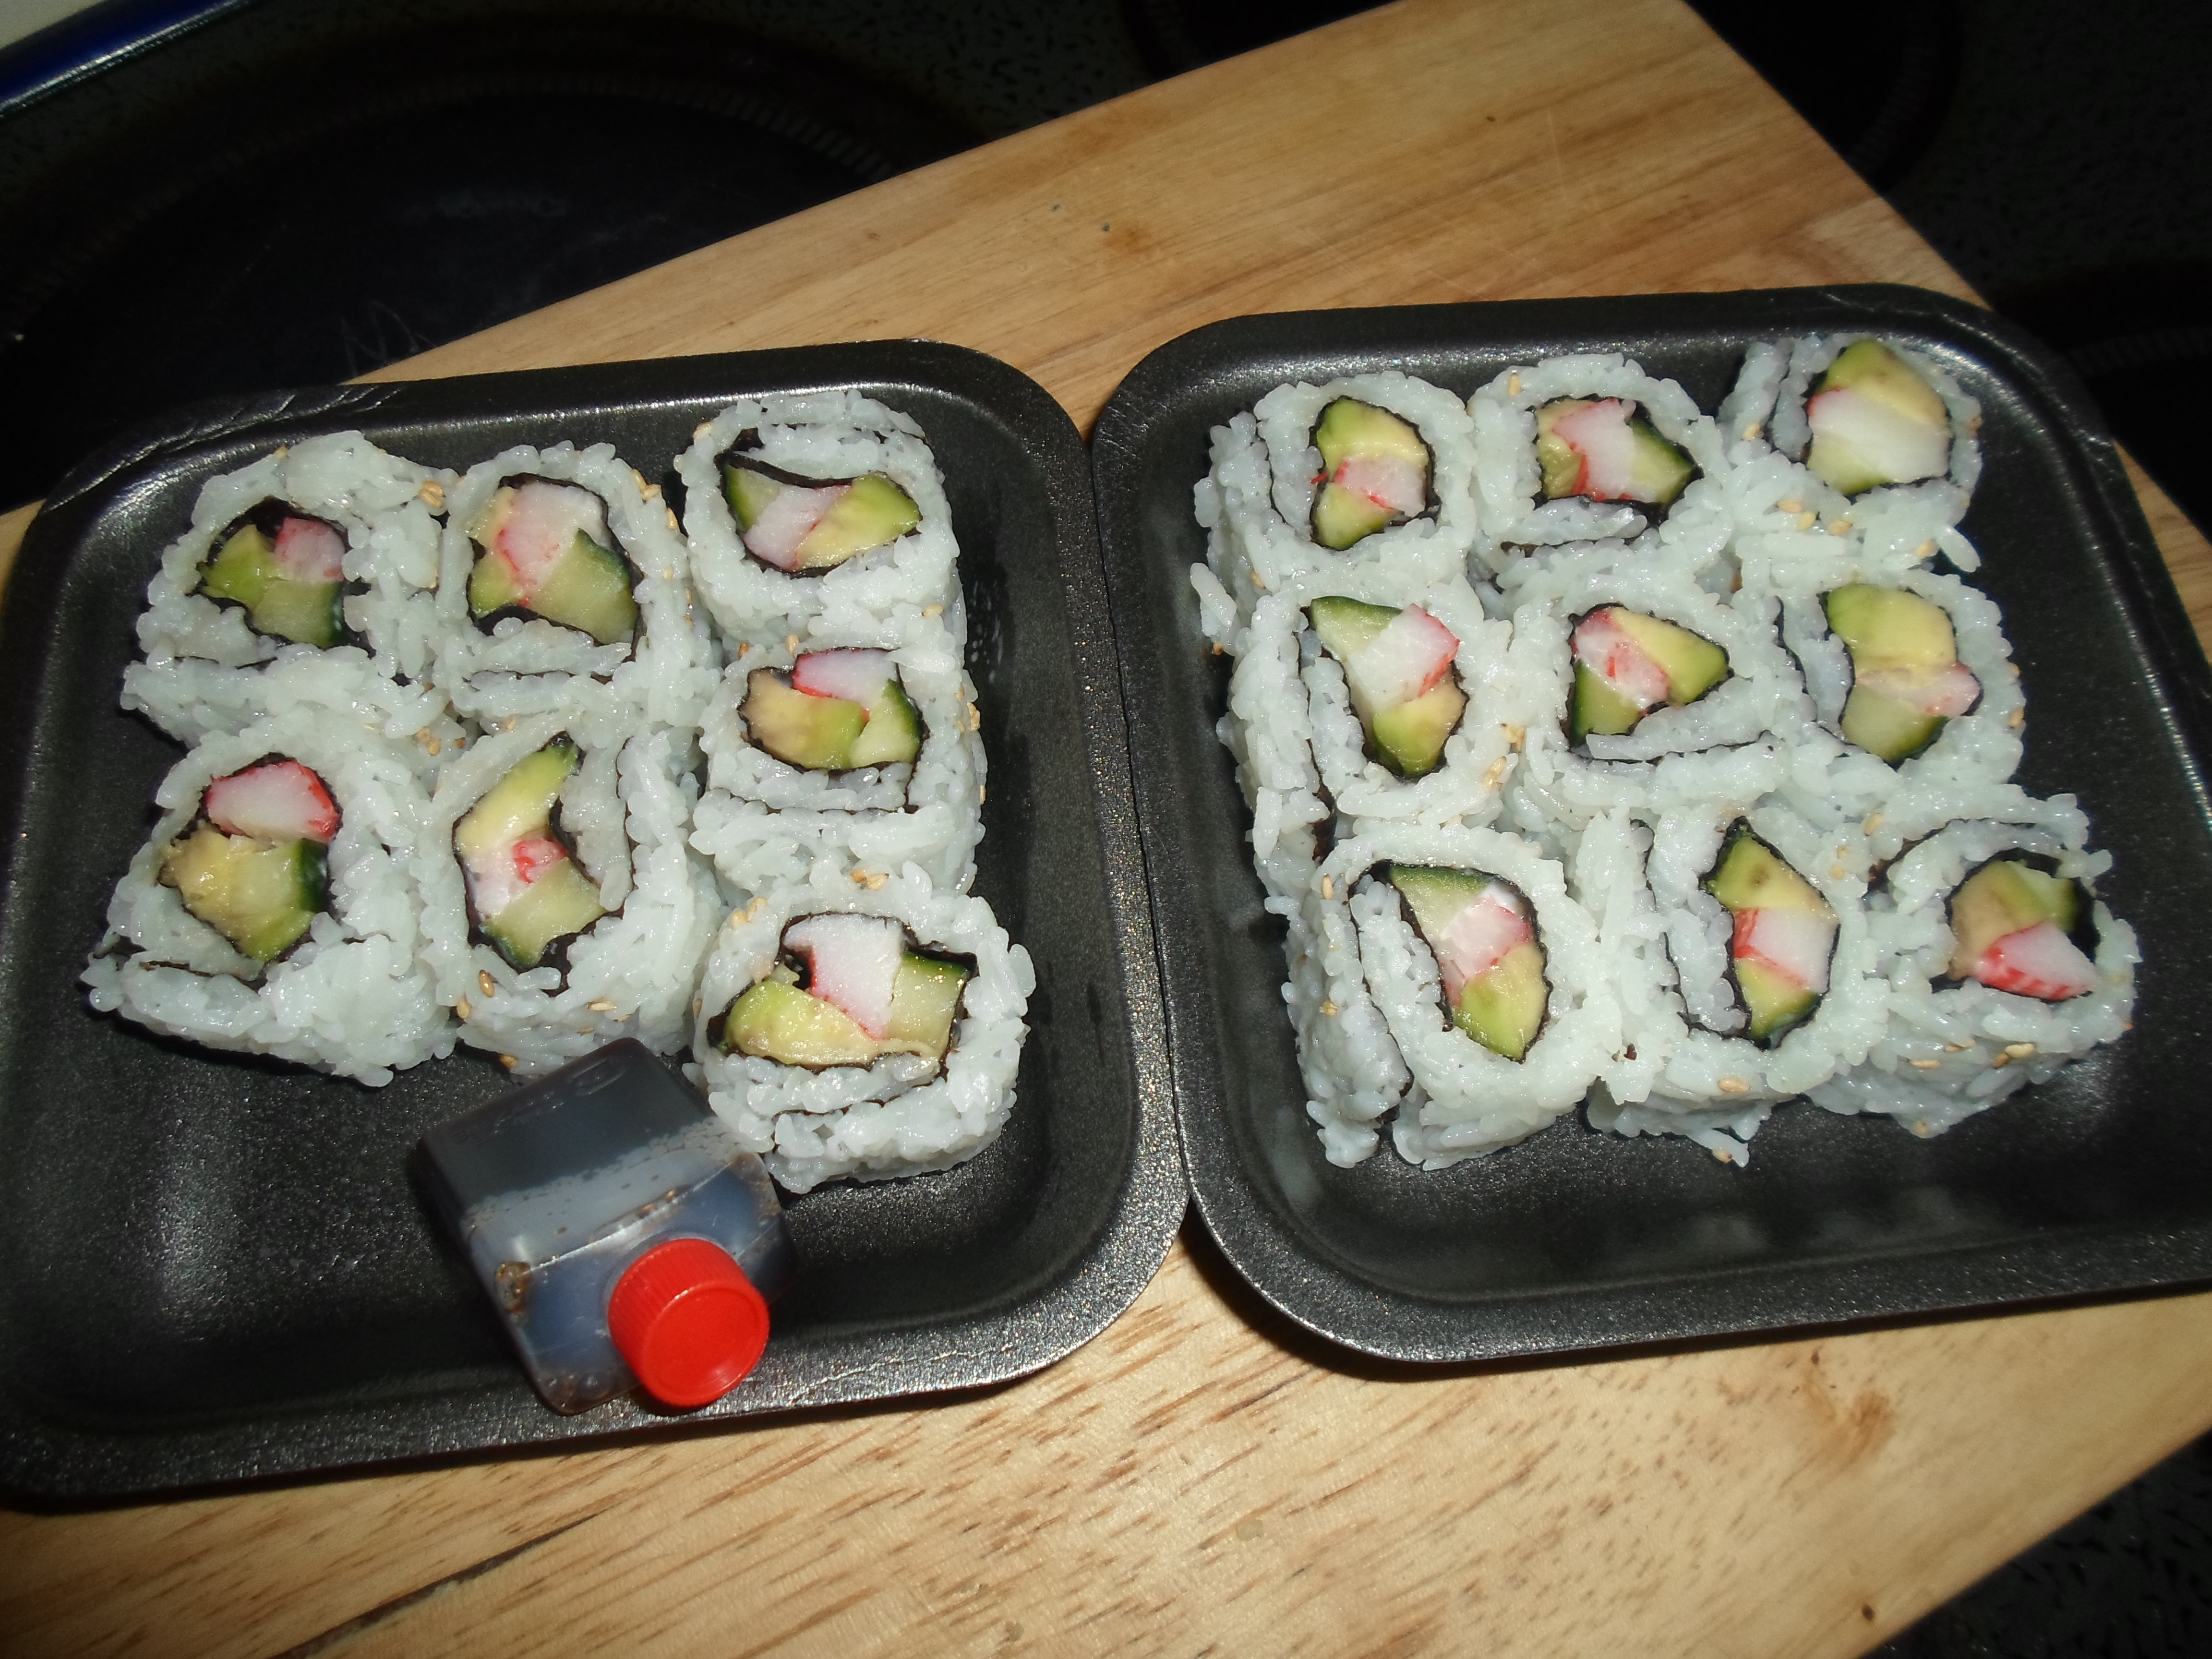 California rolls by me and my friend from Kazakhstan